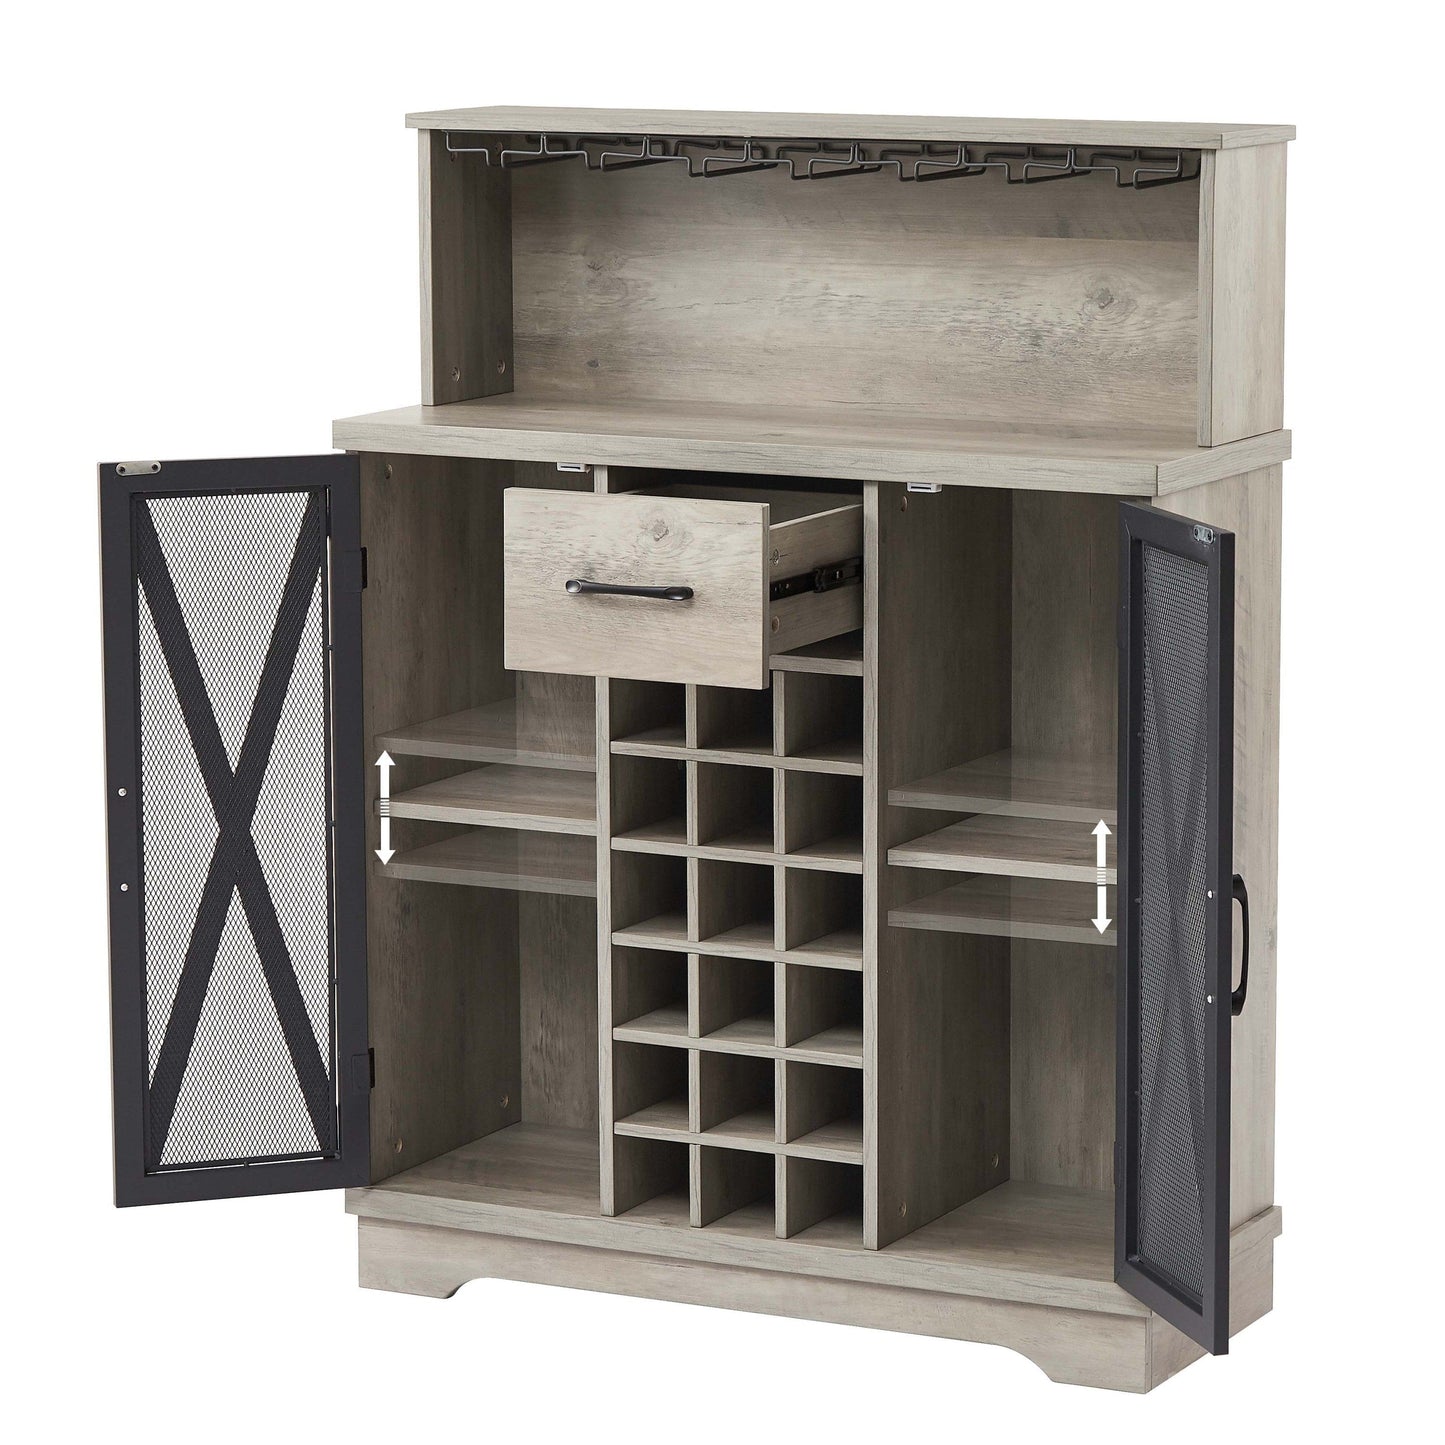 1st Choice Furniture Direct Wine Cabinet 1st Choice Vintage Industrial Wine Cabinet for Stylish Home Décor